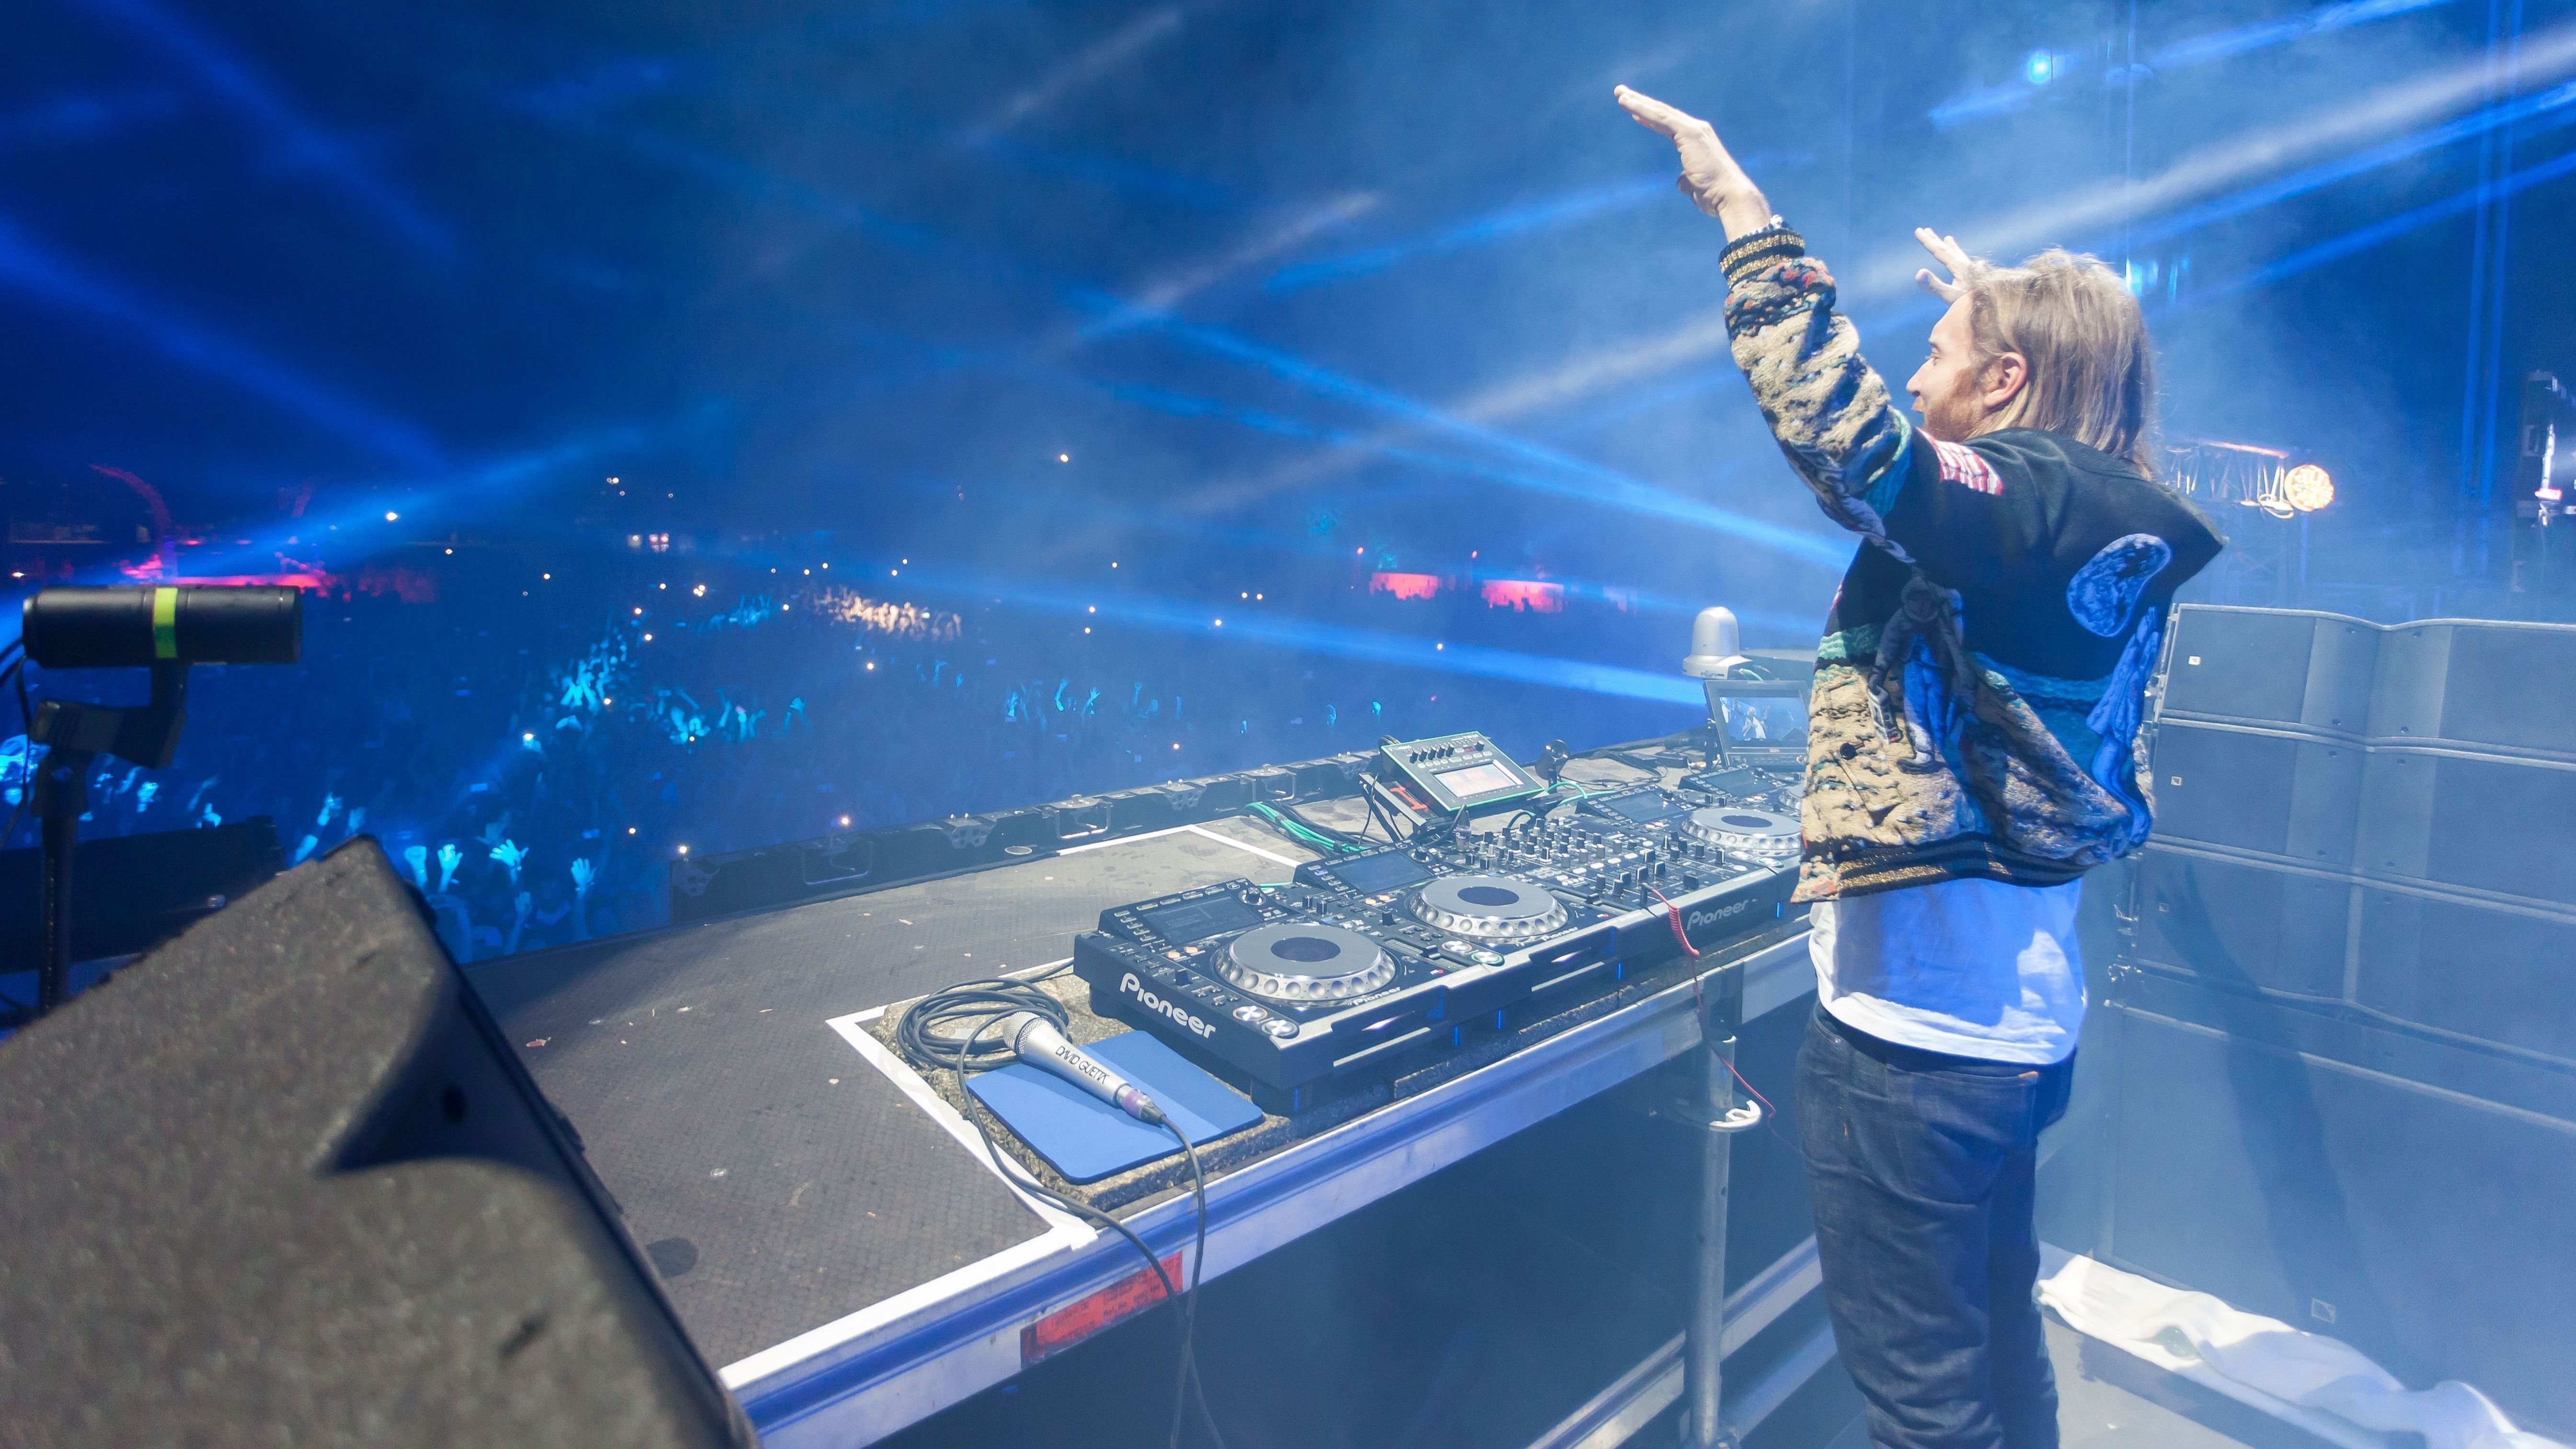 The DJ David Guetta will put “the perfect closing” to the summer time concert events in Vigo